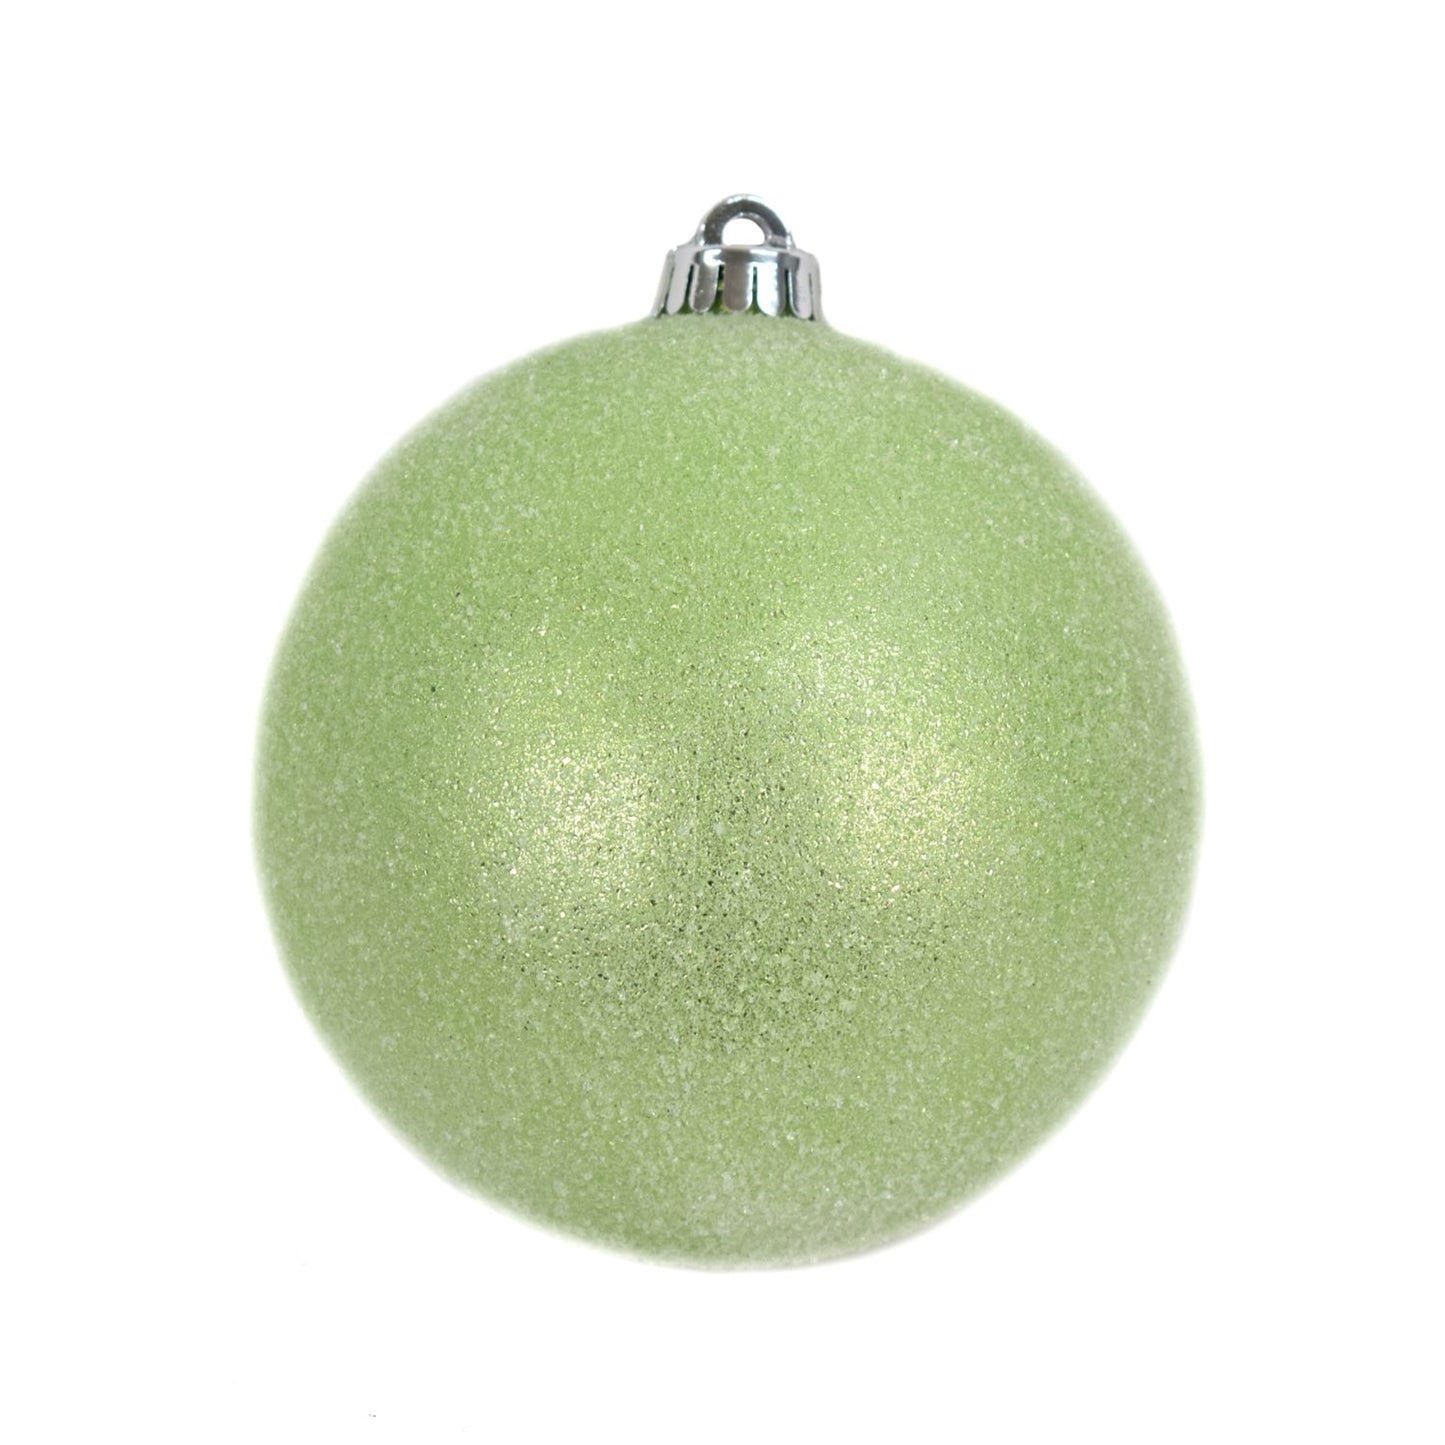 6" Sugar Frosted VP Ball Ornament in Green | XJB